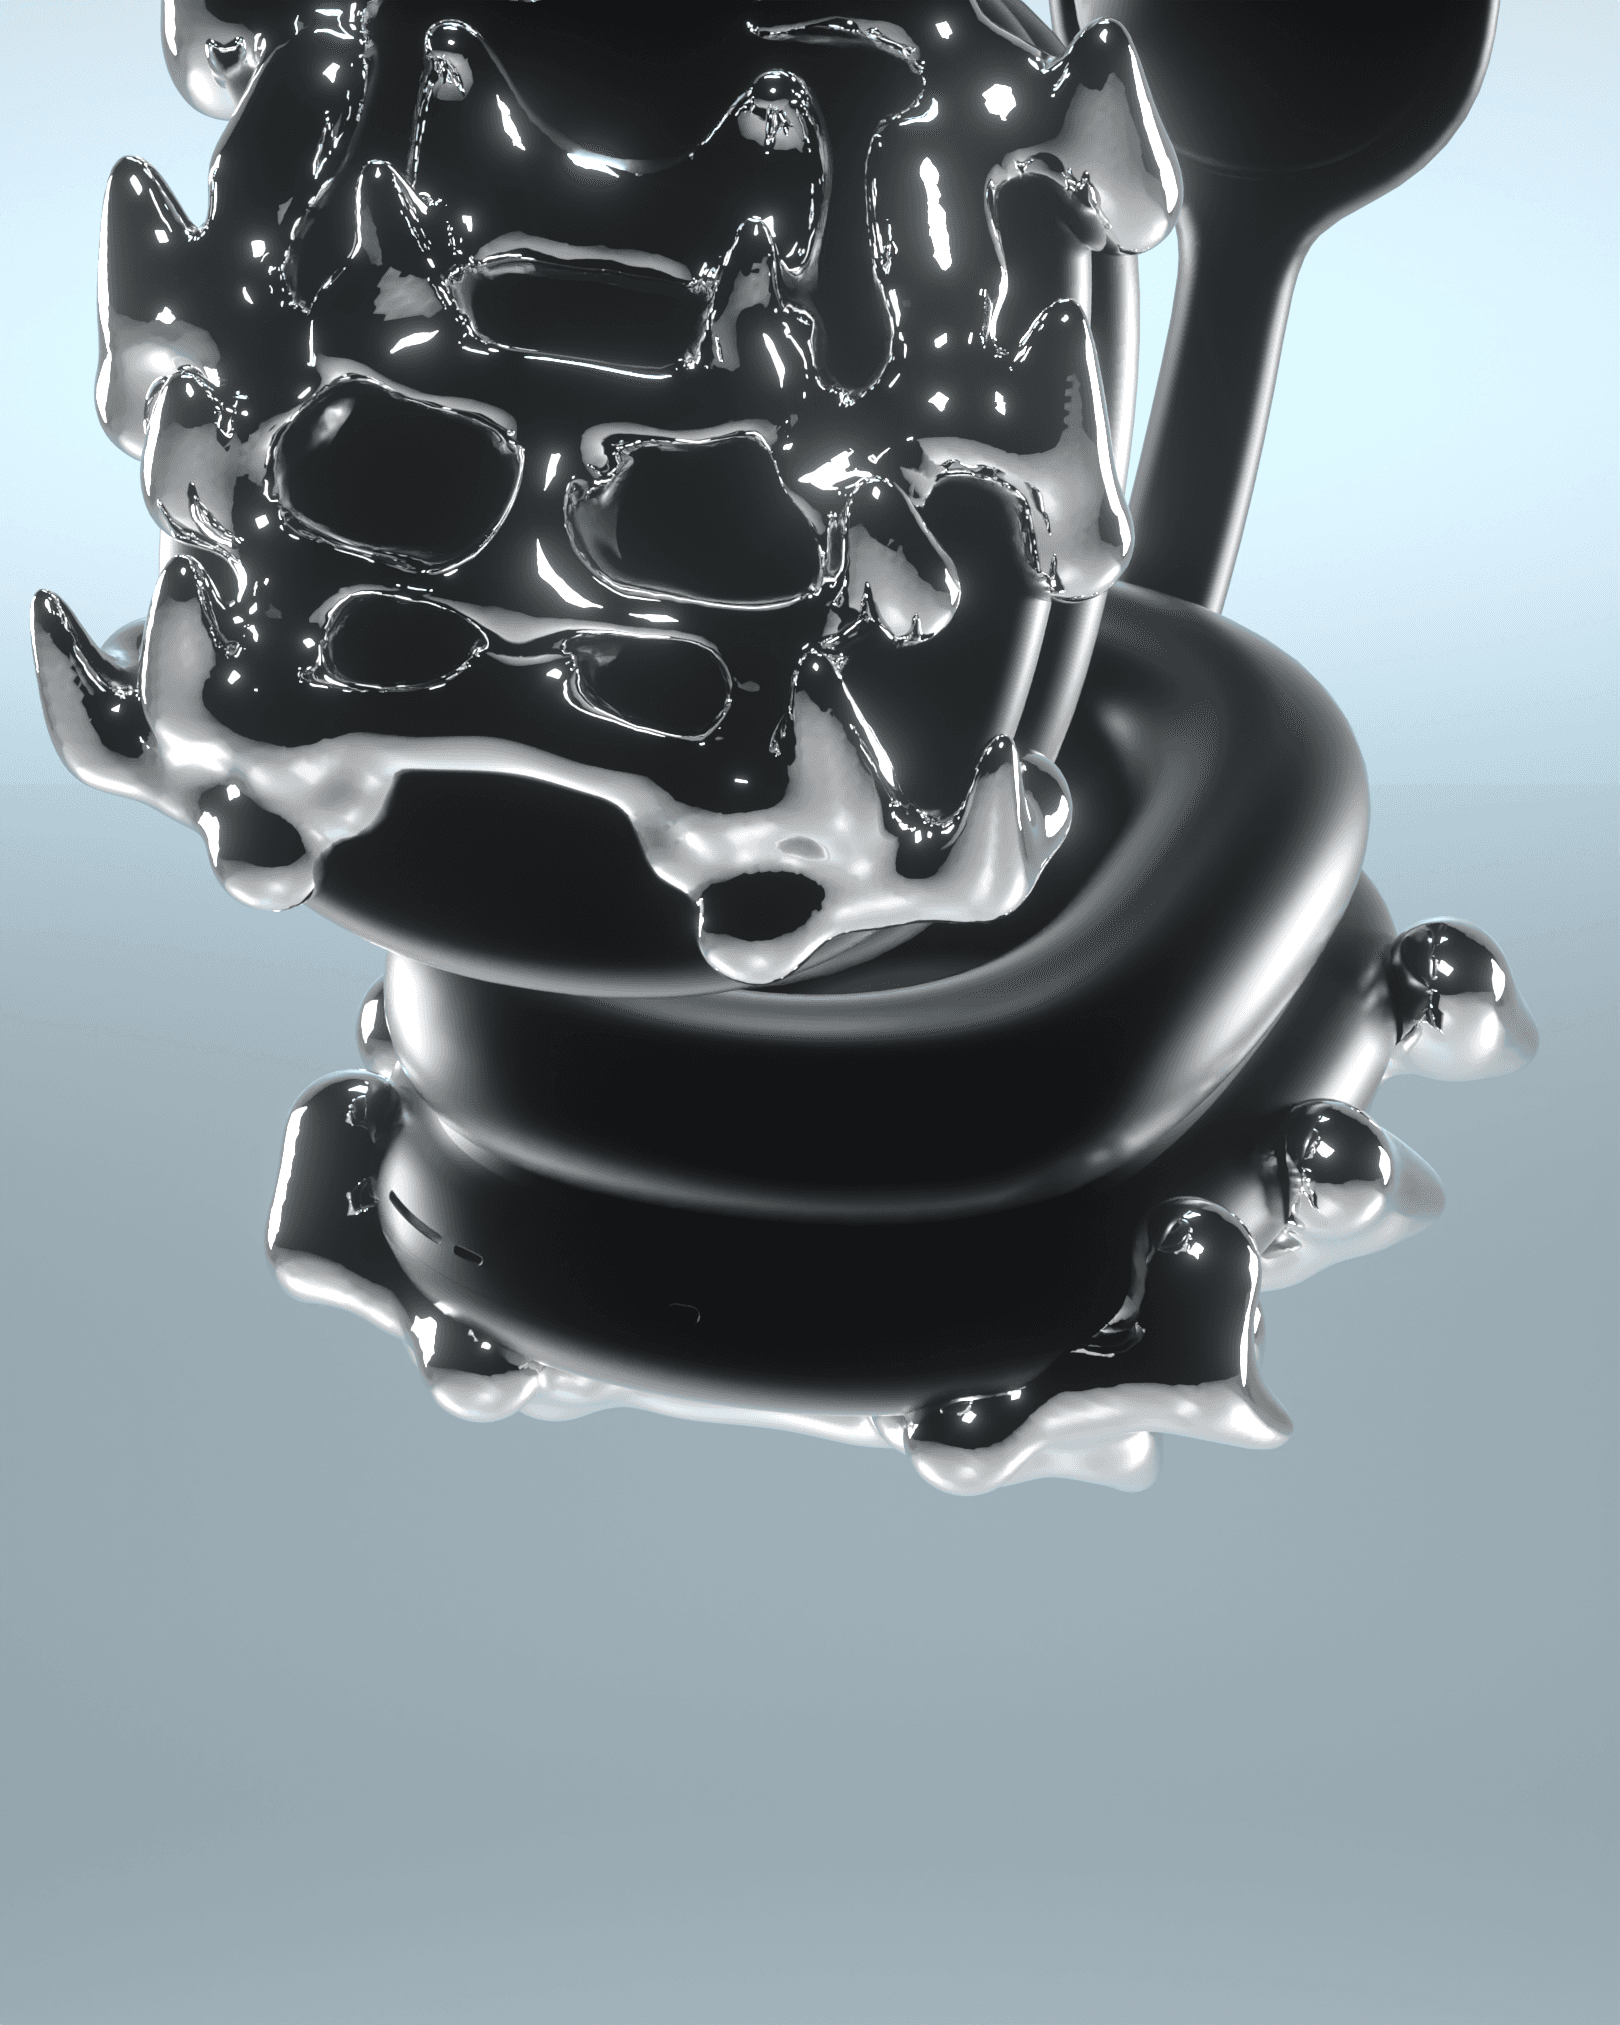 V9 ABSTRACT AIRPODS MAX ACCESSORY 3d model